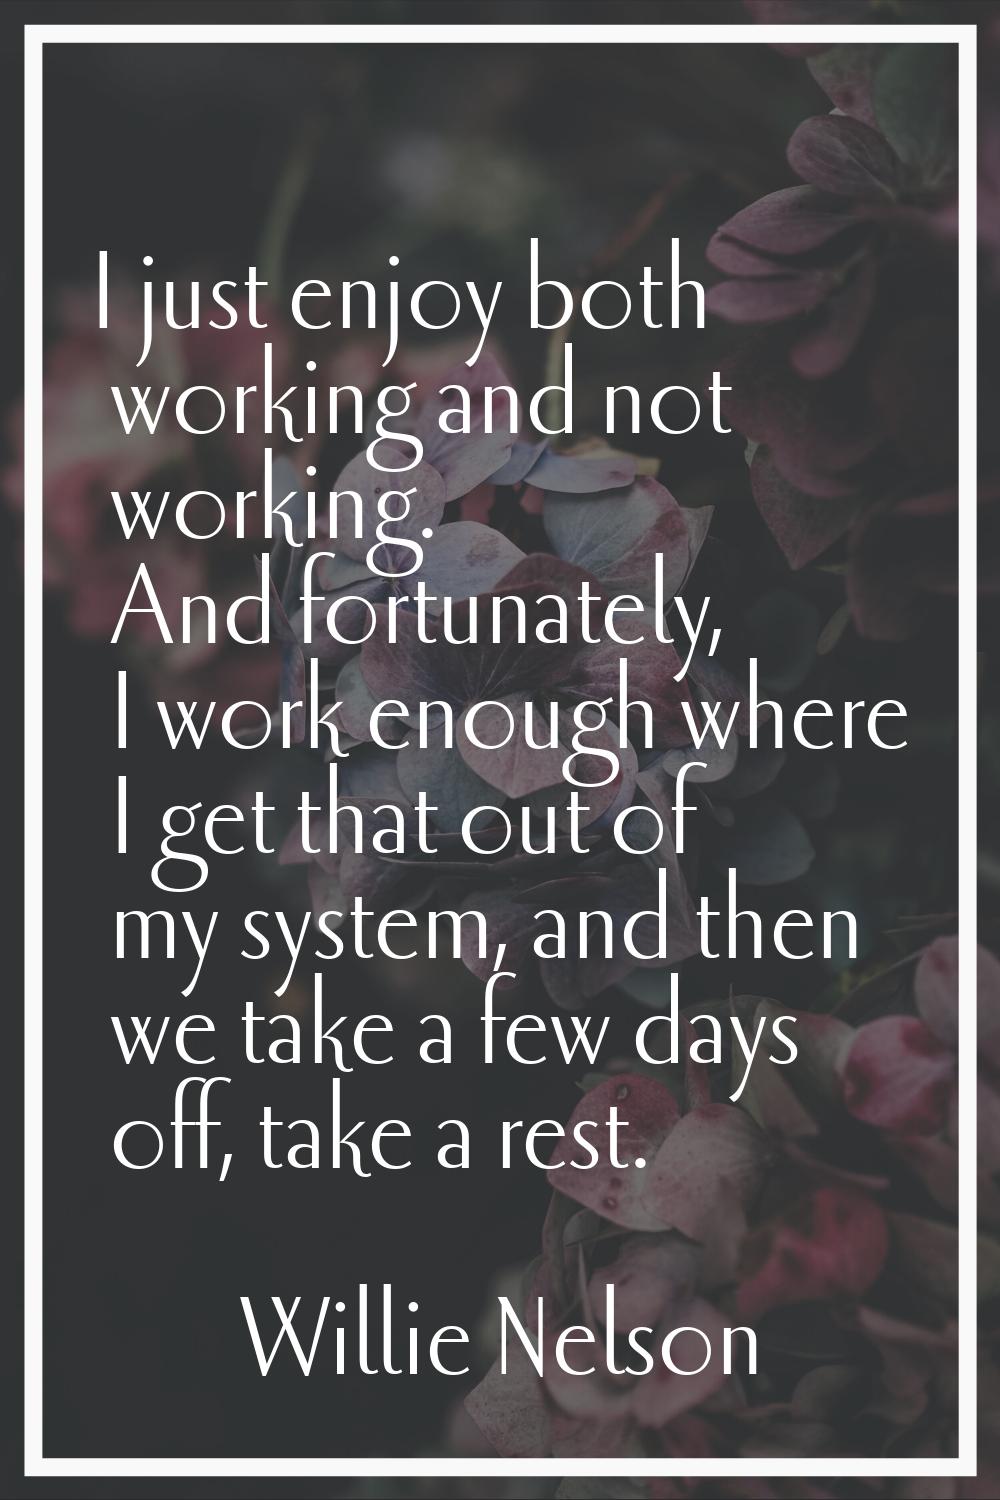 I just enjoy both working and not working. And fortunately, I work enough where I get that out of m